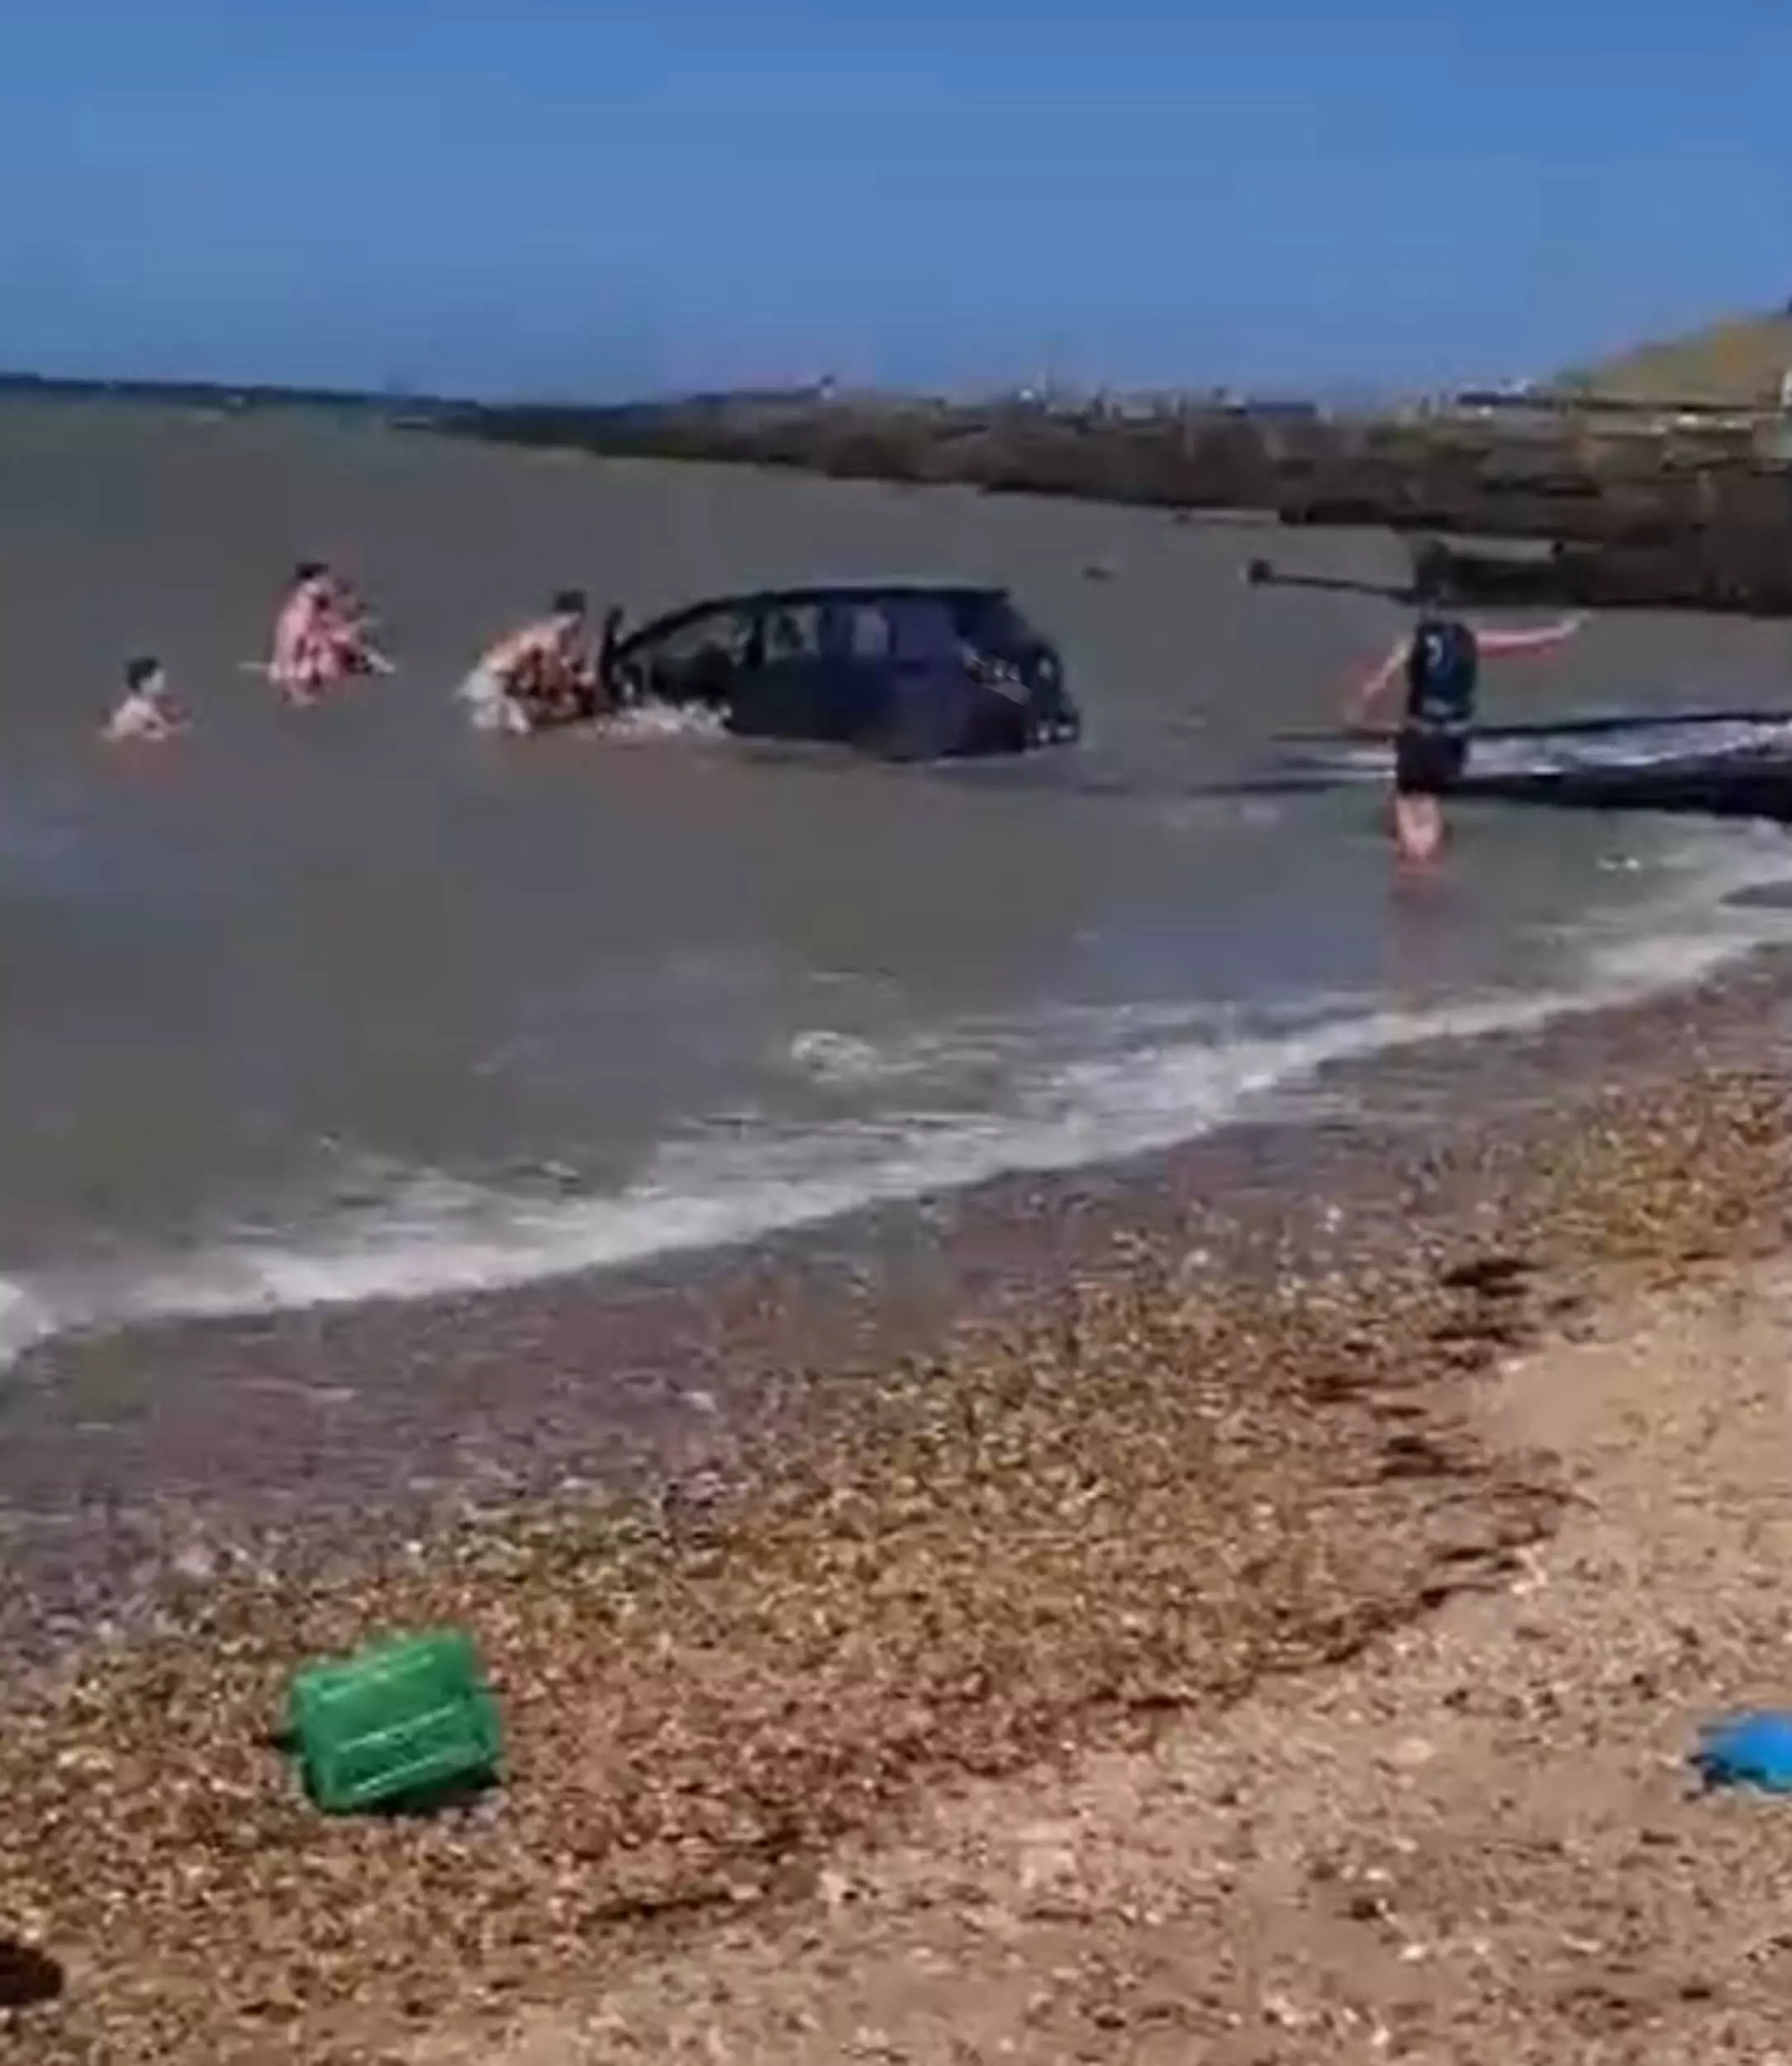 The Volkswagen was swept out to sea after it was parked too close to the water.